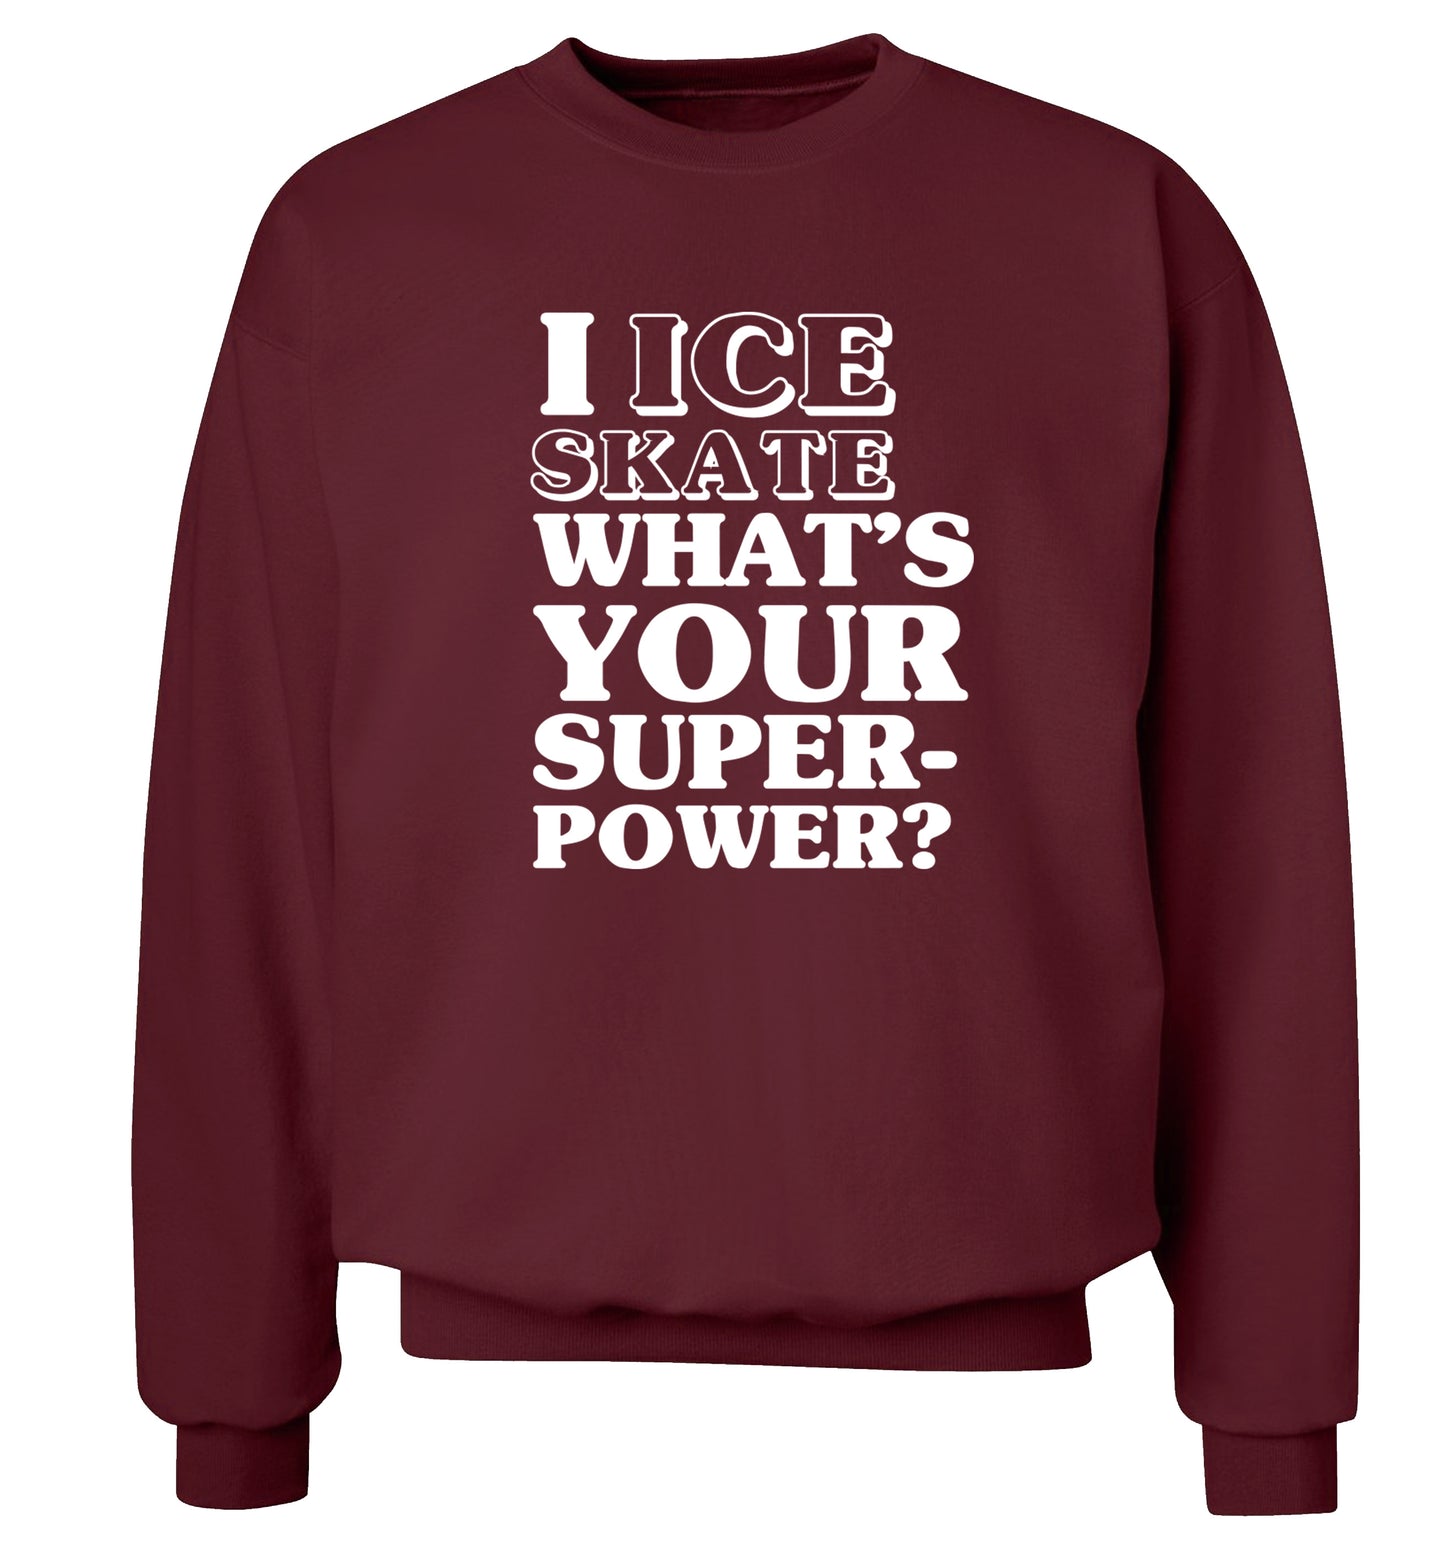 I ice skate what's your superpower? Adult's unisexmaroon Sweater 2XL